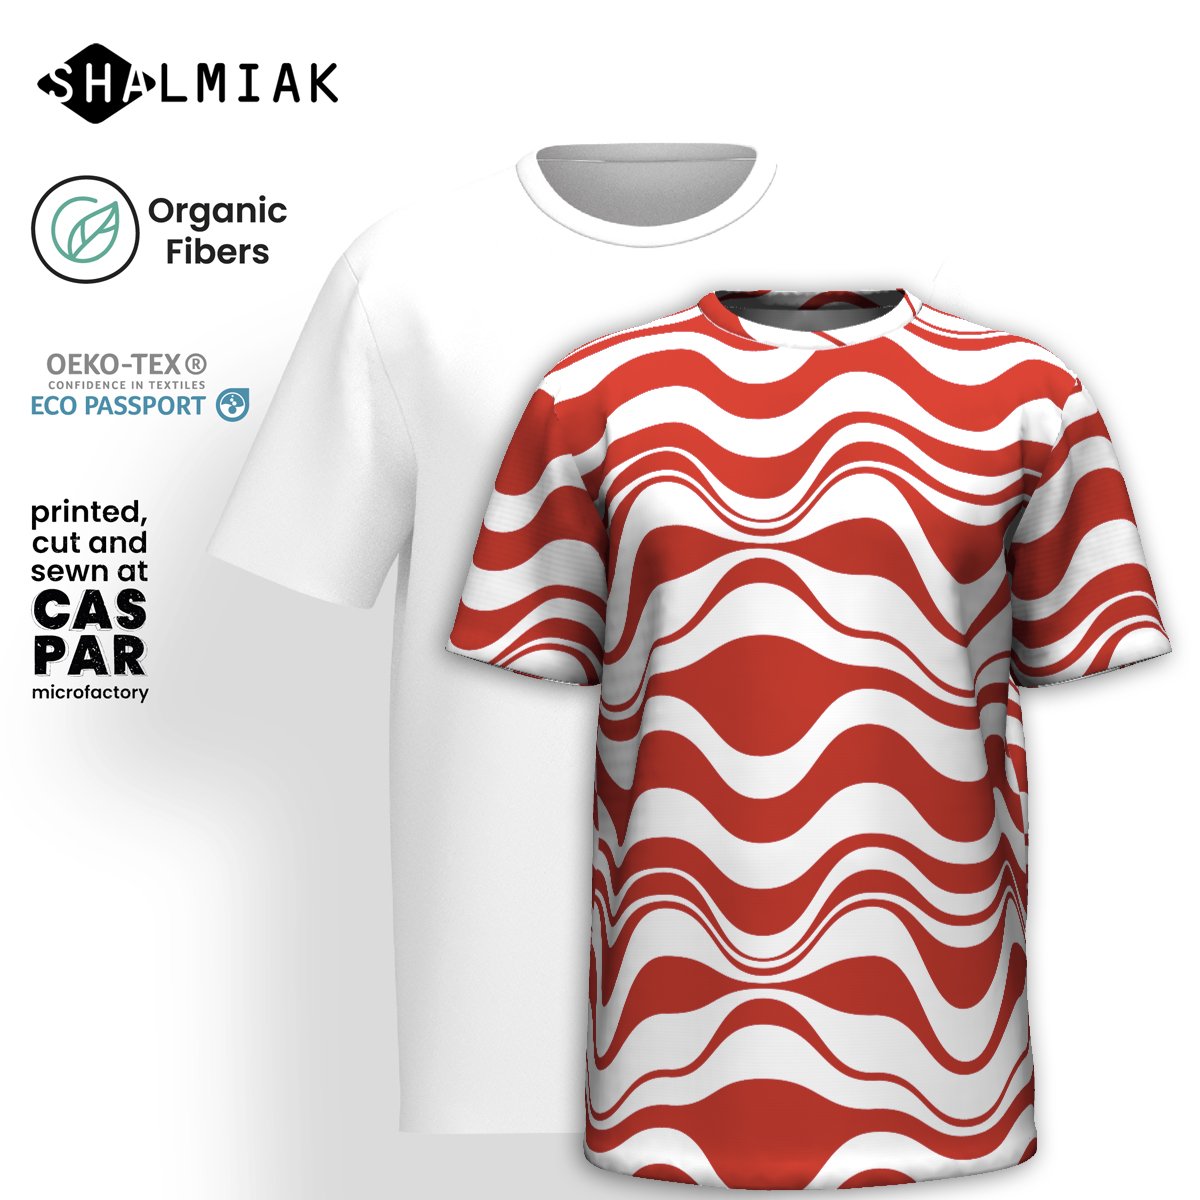 ENERGY WAVES red- T-shirt (organic cotton)